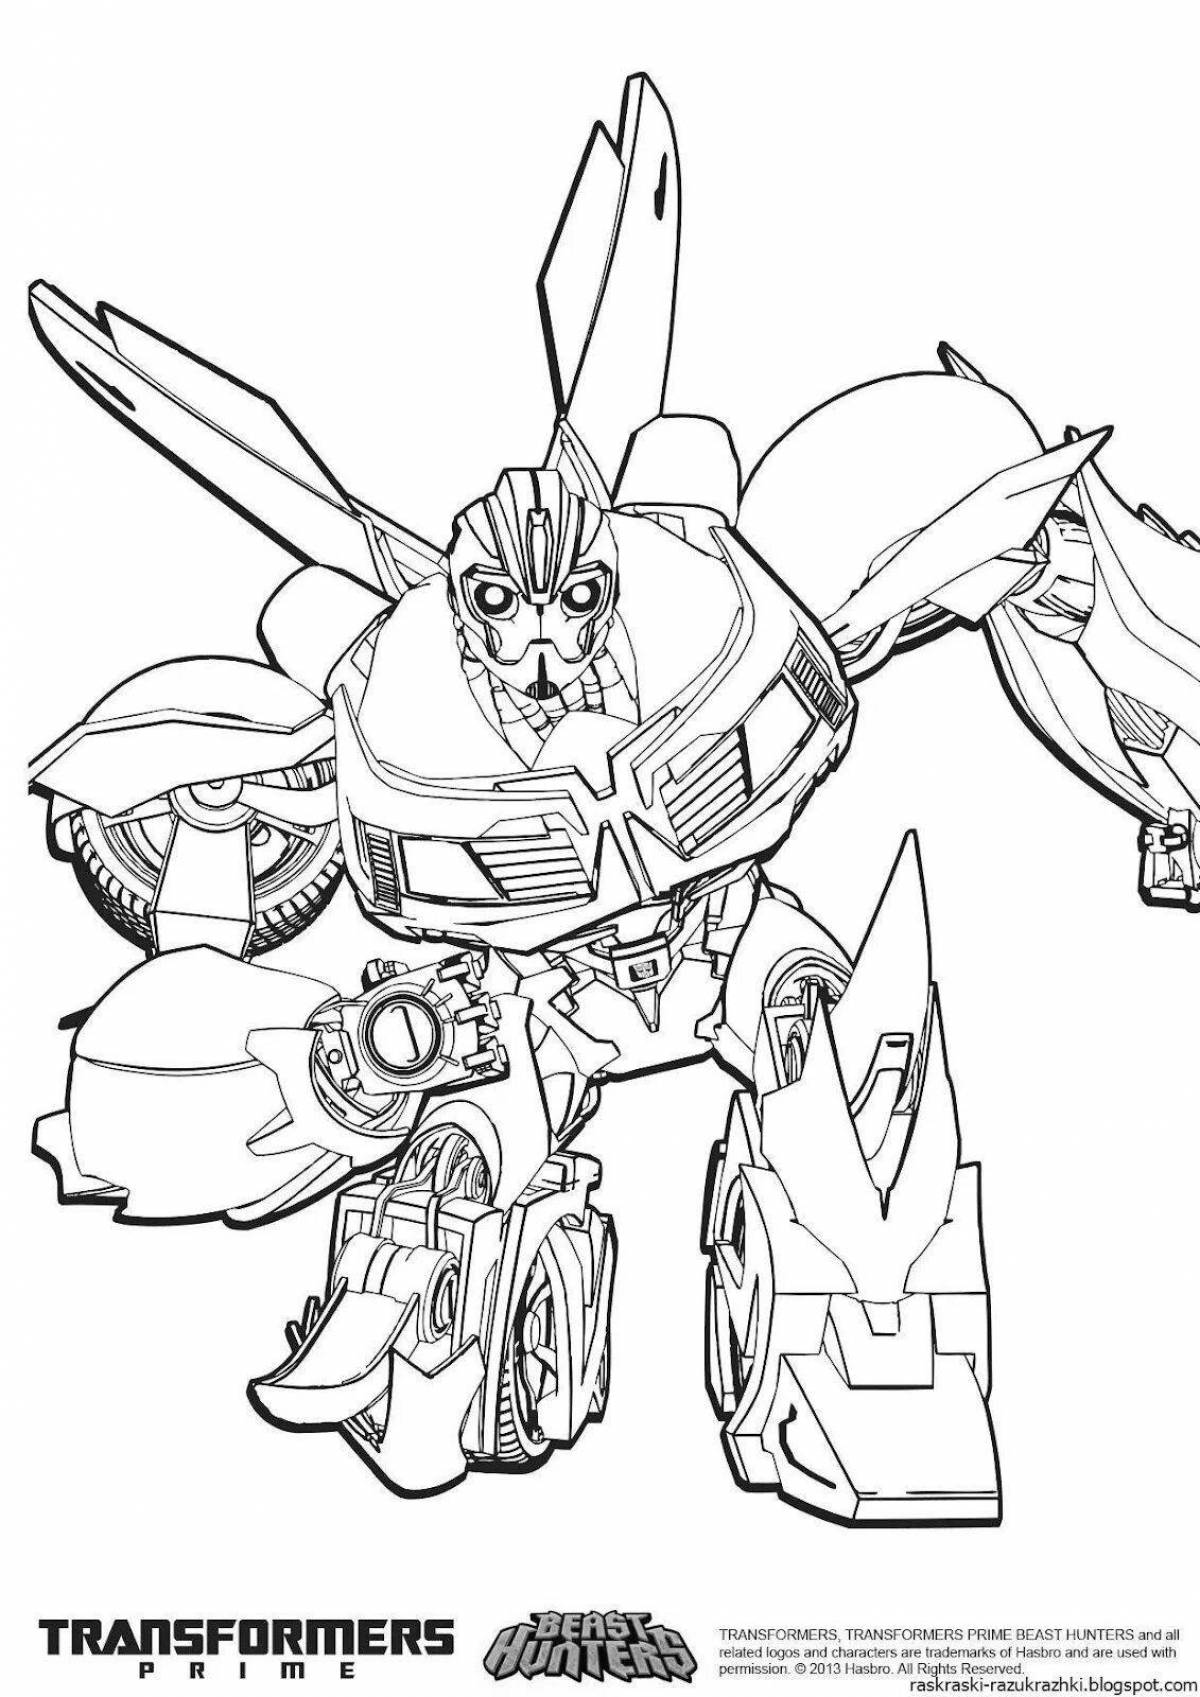 Funny bumblebee coloring page for kids